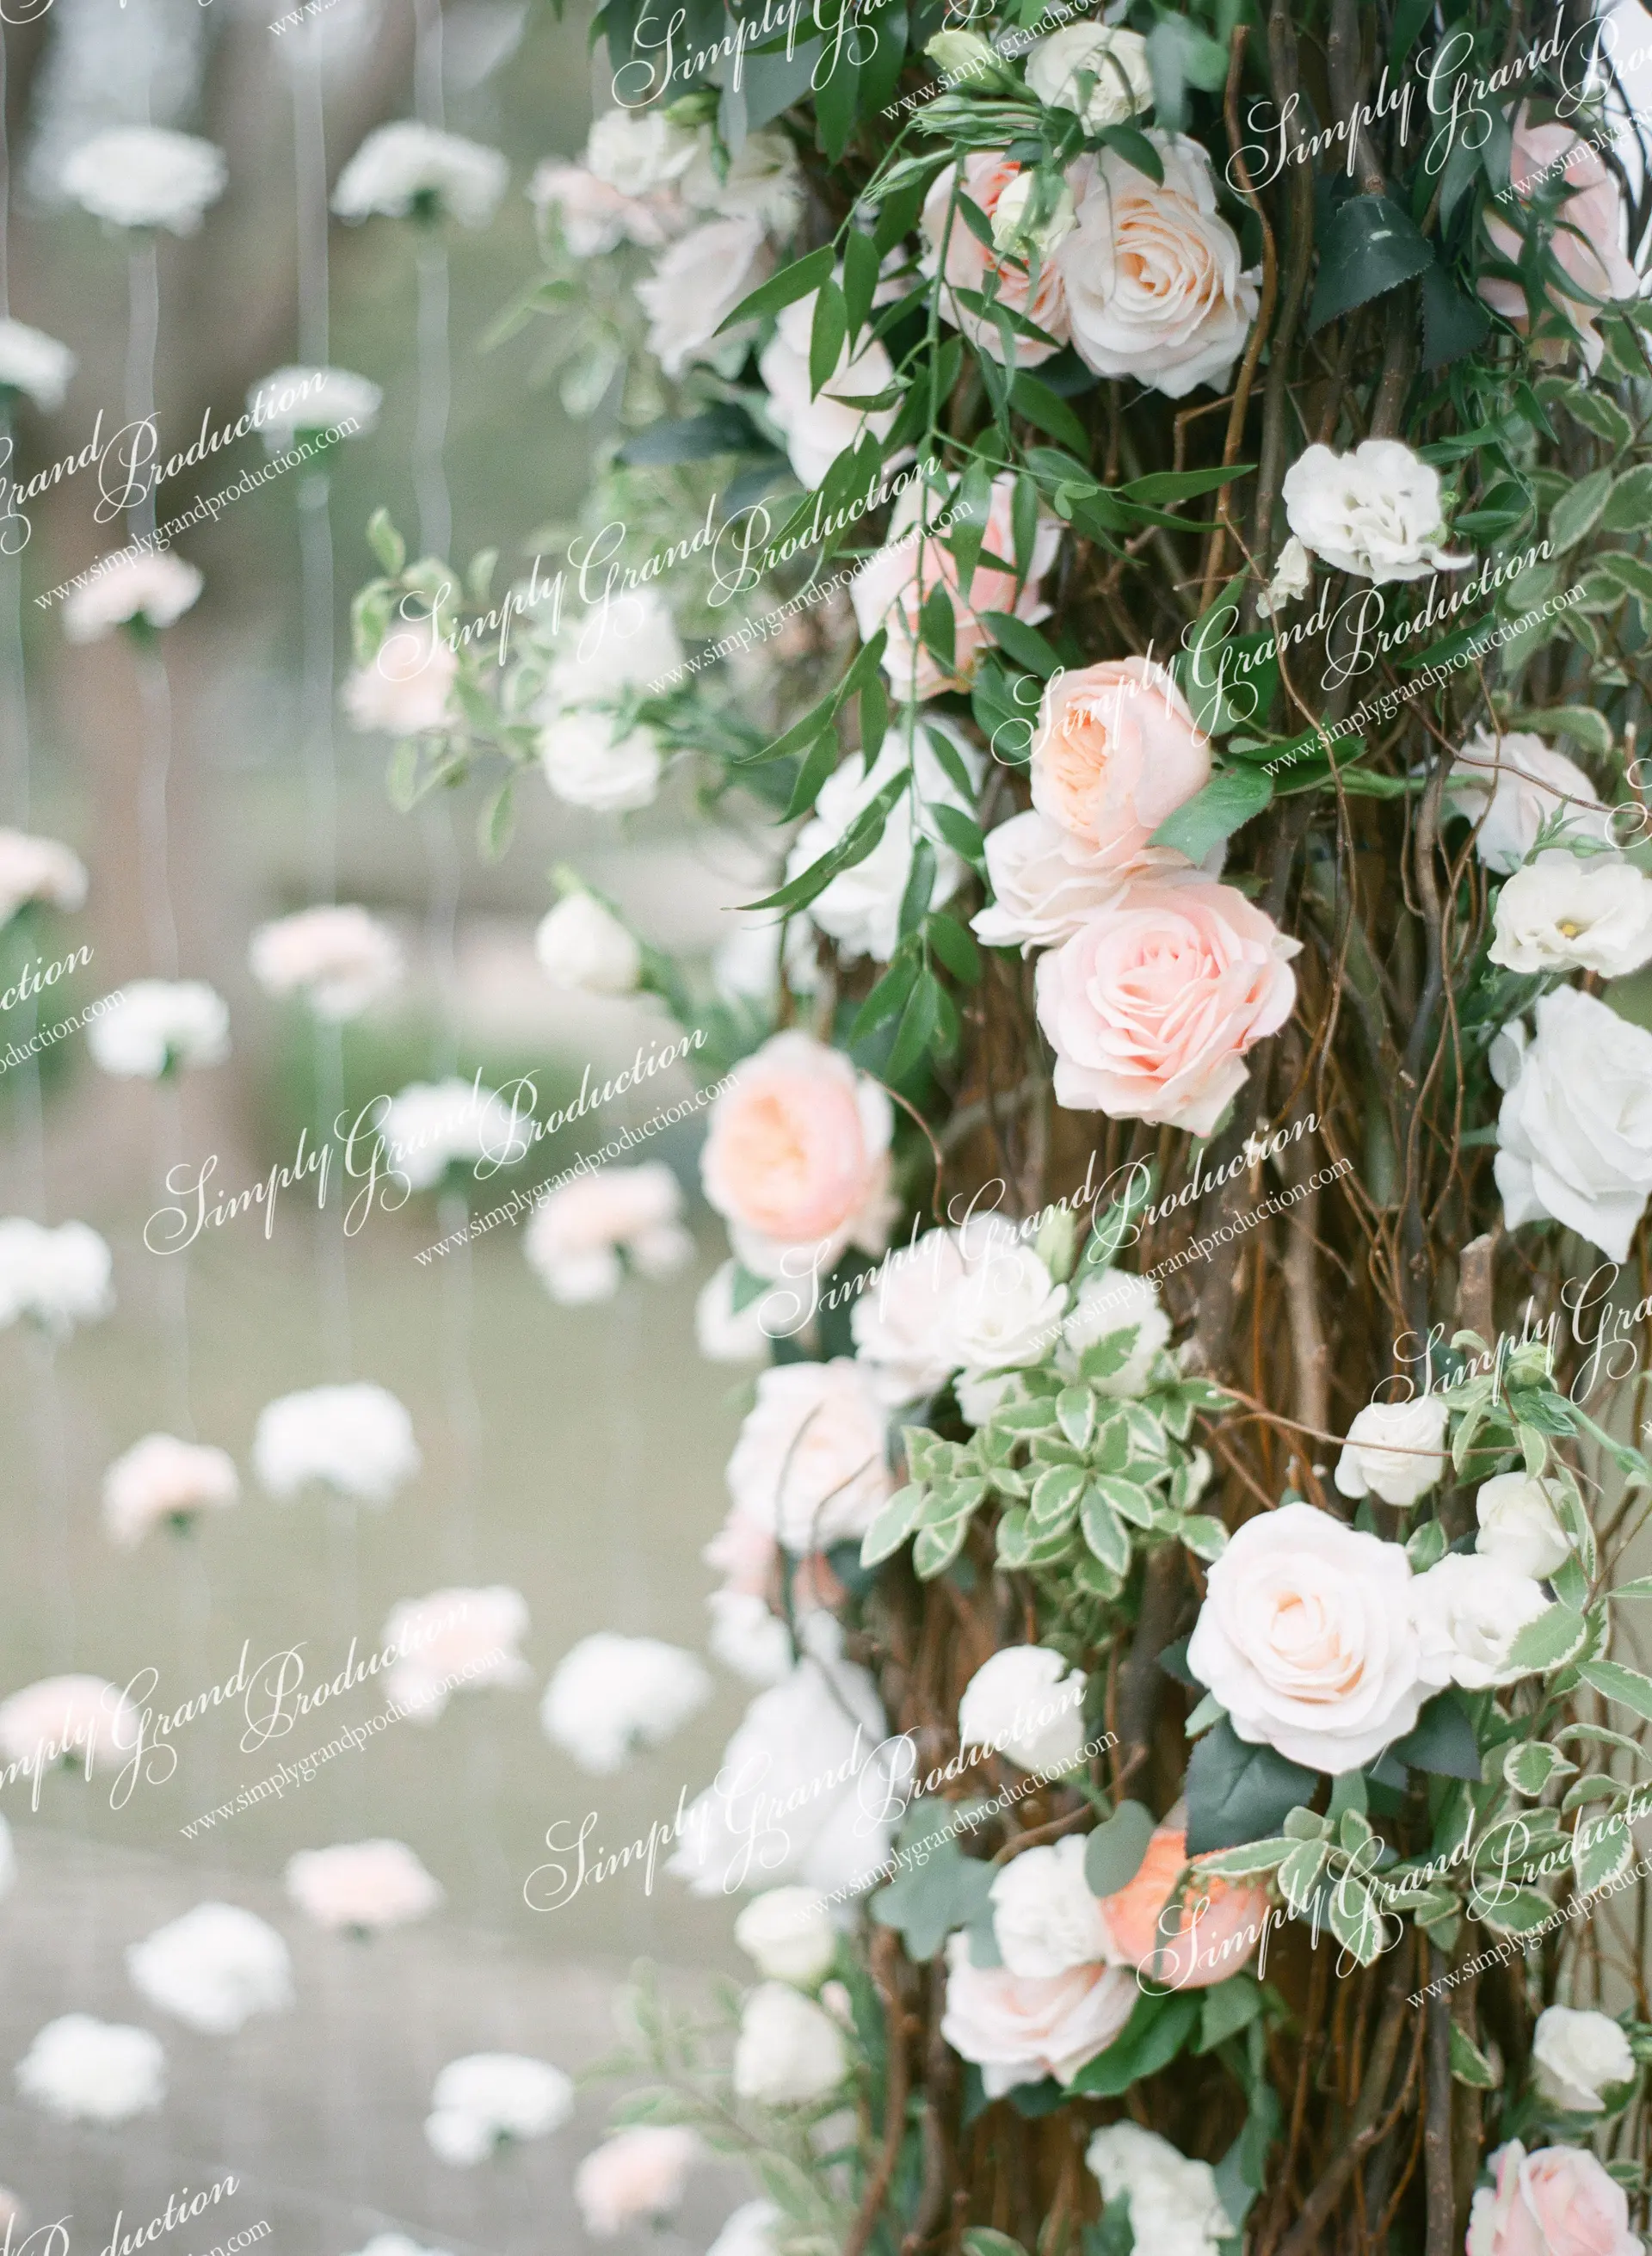 Simply_Grand_Production_Outdoor_wedding_decoration_rose_ivory_peach_Beas_River_1_10.jpg